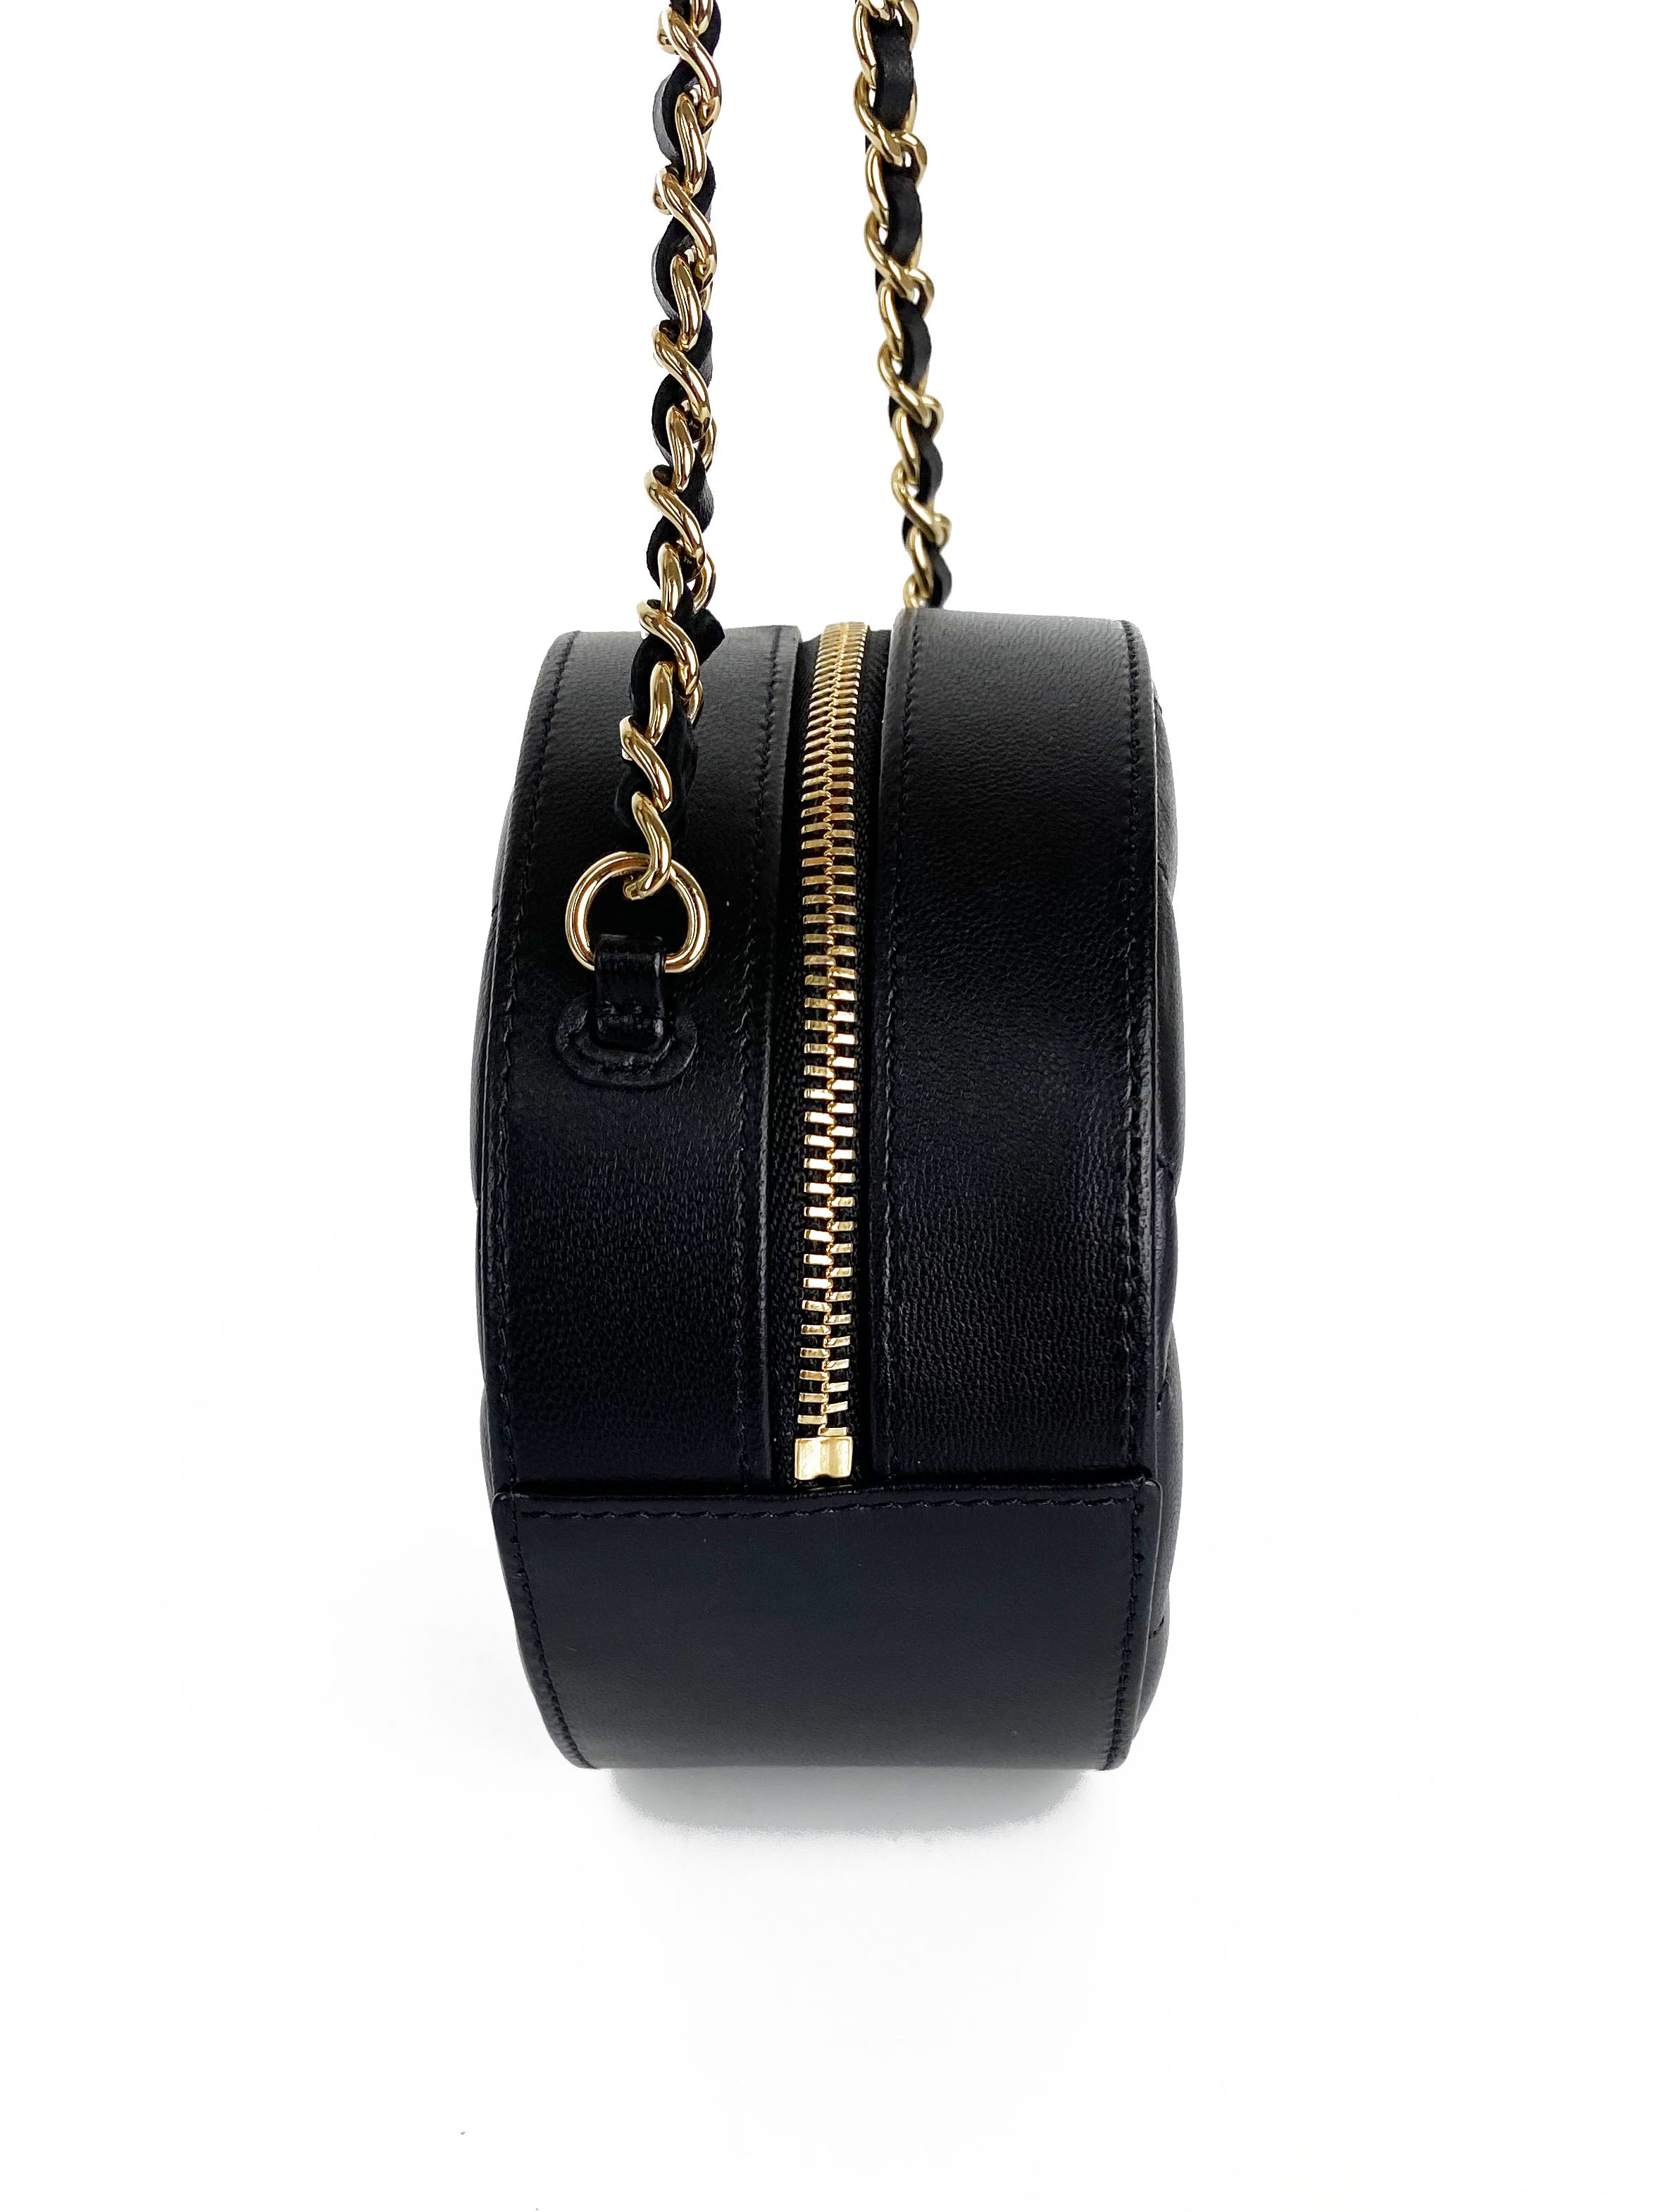 Chanel Black Round Shoulder Bag with Bow